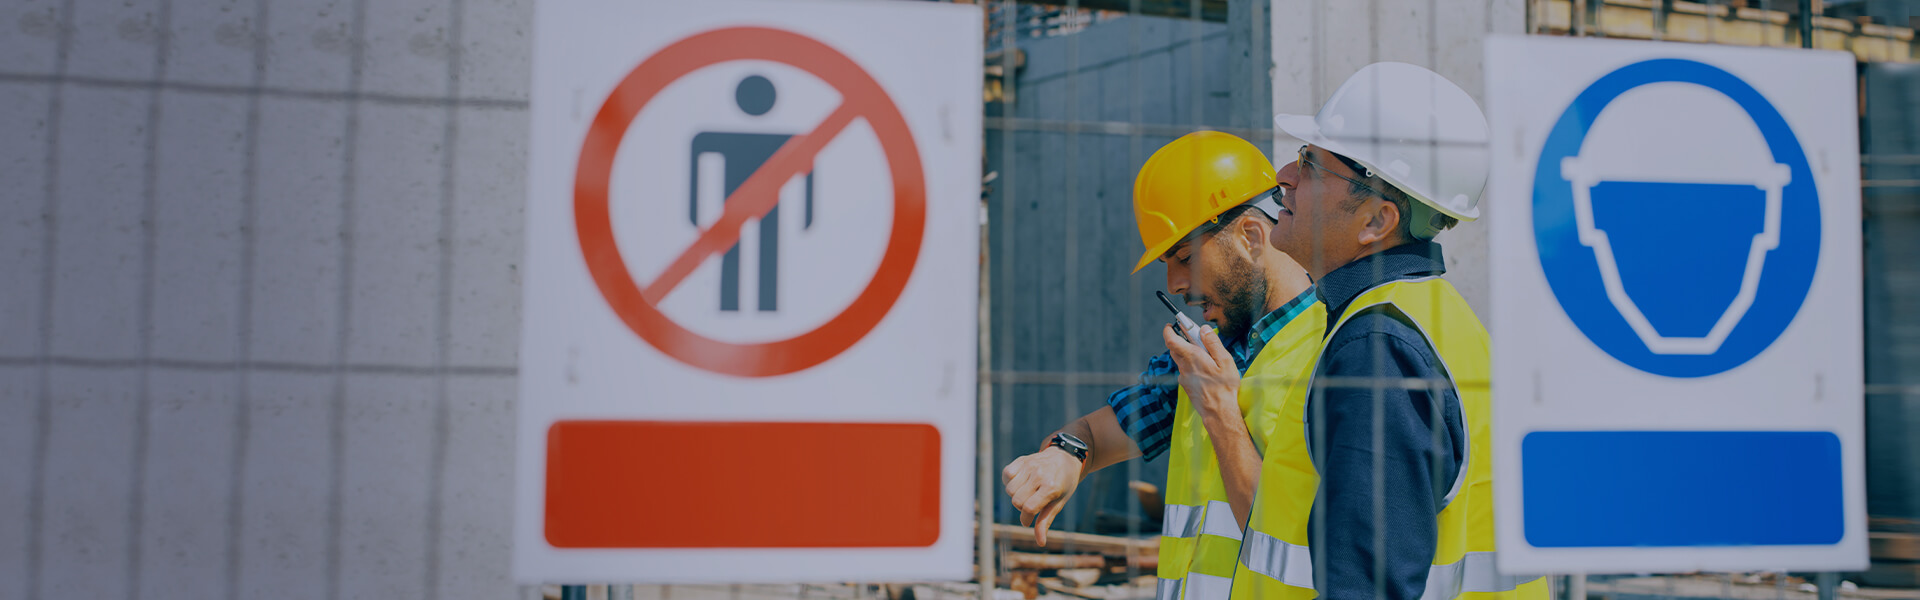 Image of two construction workers with construction site warning signs to wear a hard hat, and no unauthorised persons in the foreground